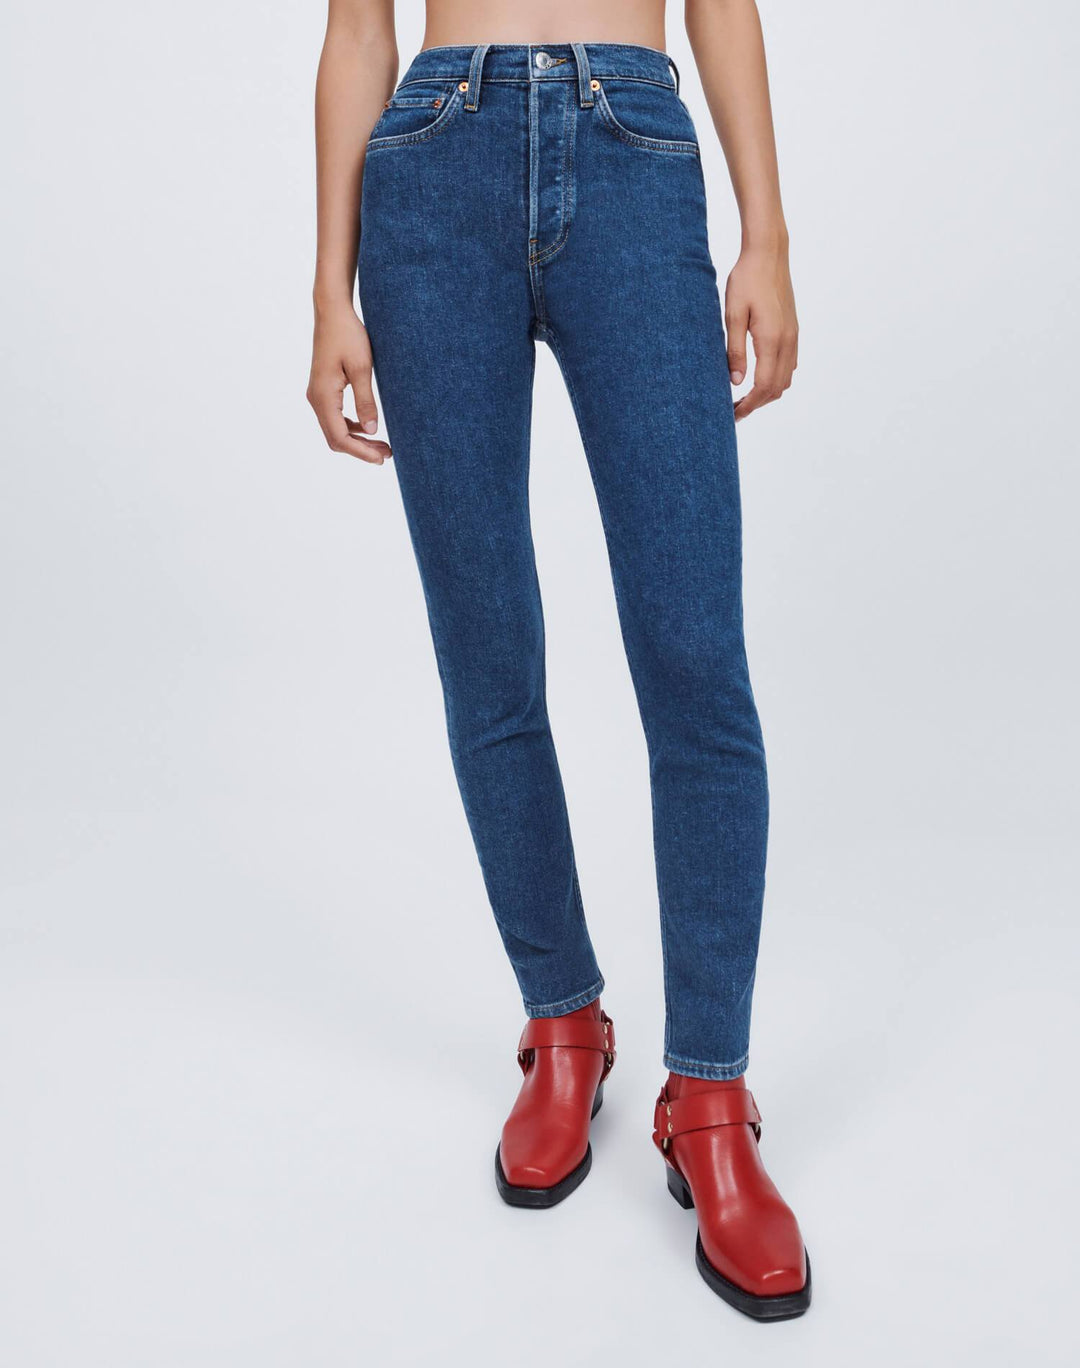 H&M launches unisex denim collection with sustainability focus